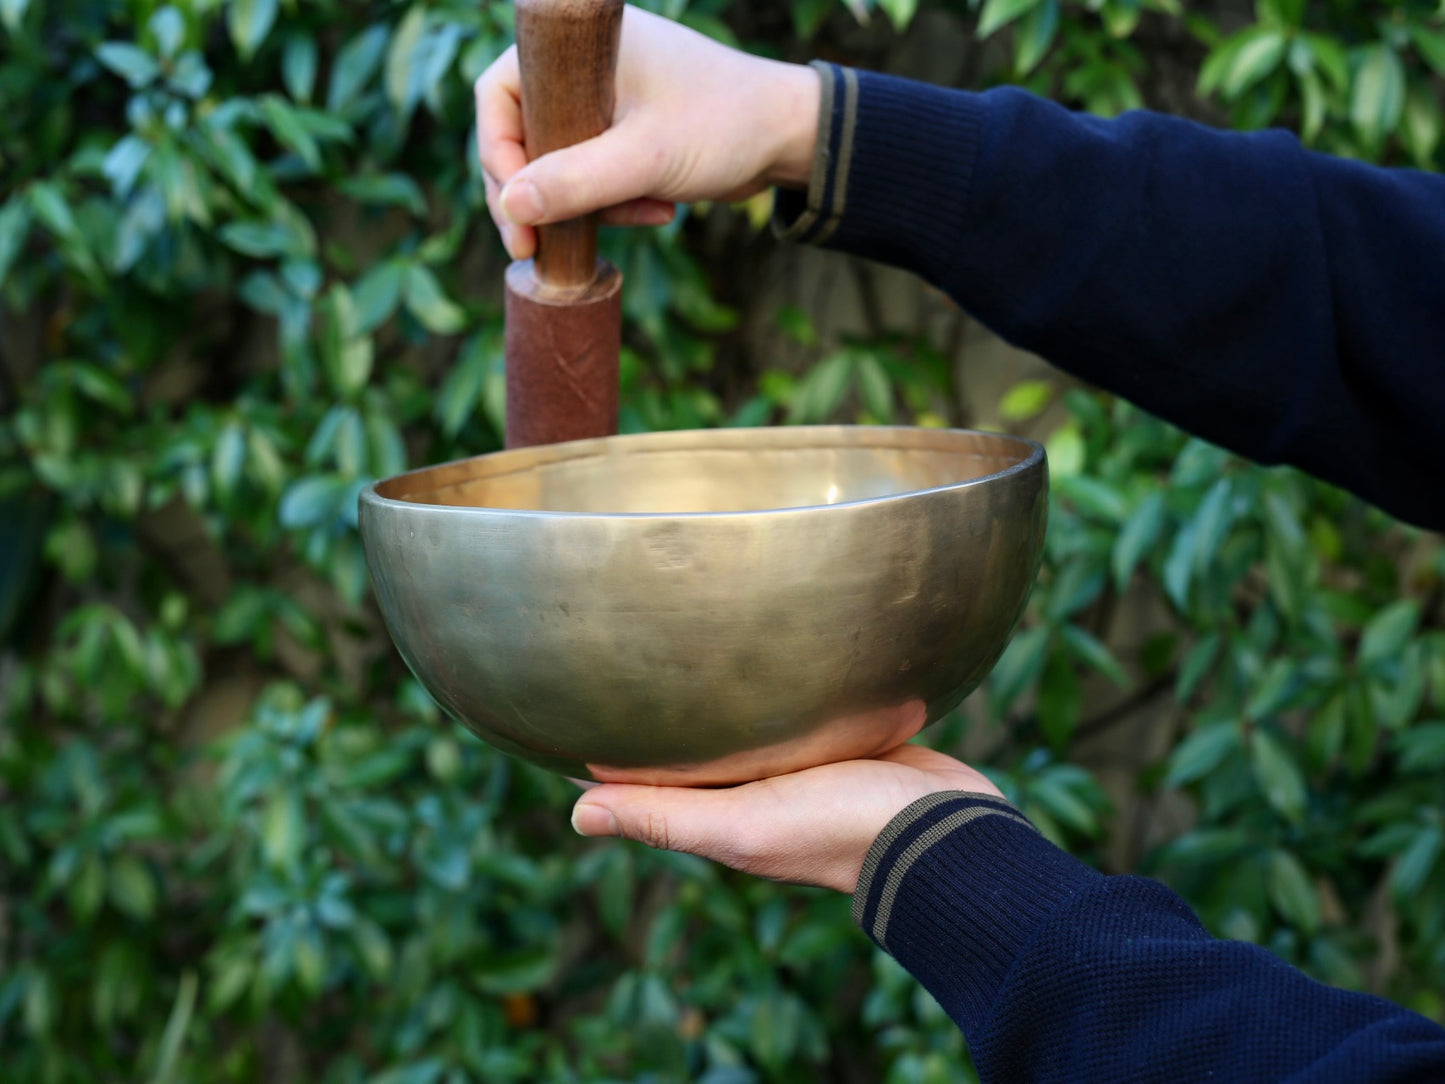 Contemporary Flow Singing Bowl - Base Note D#3 159 Hz